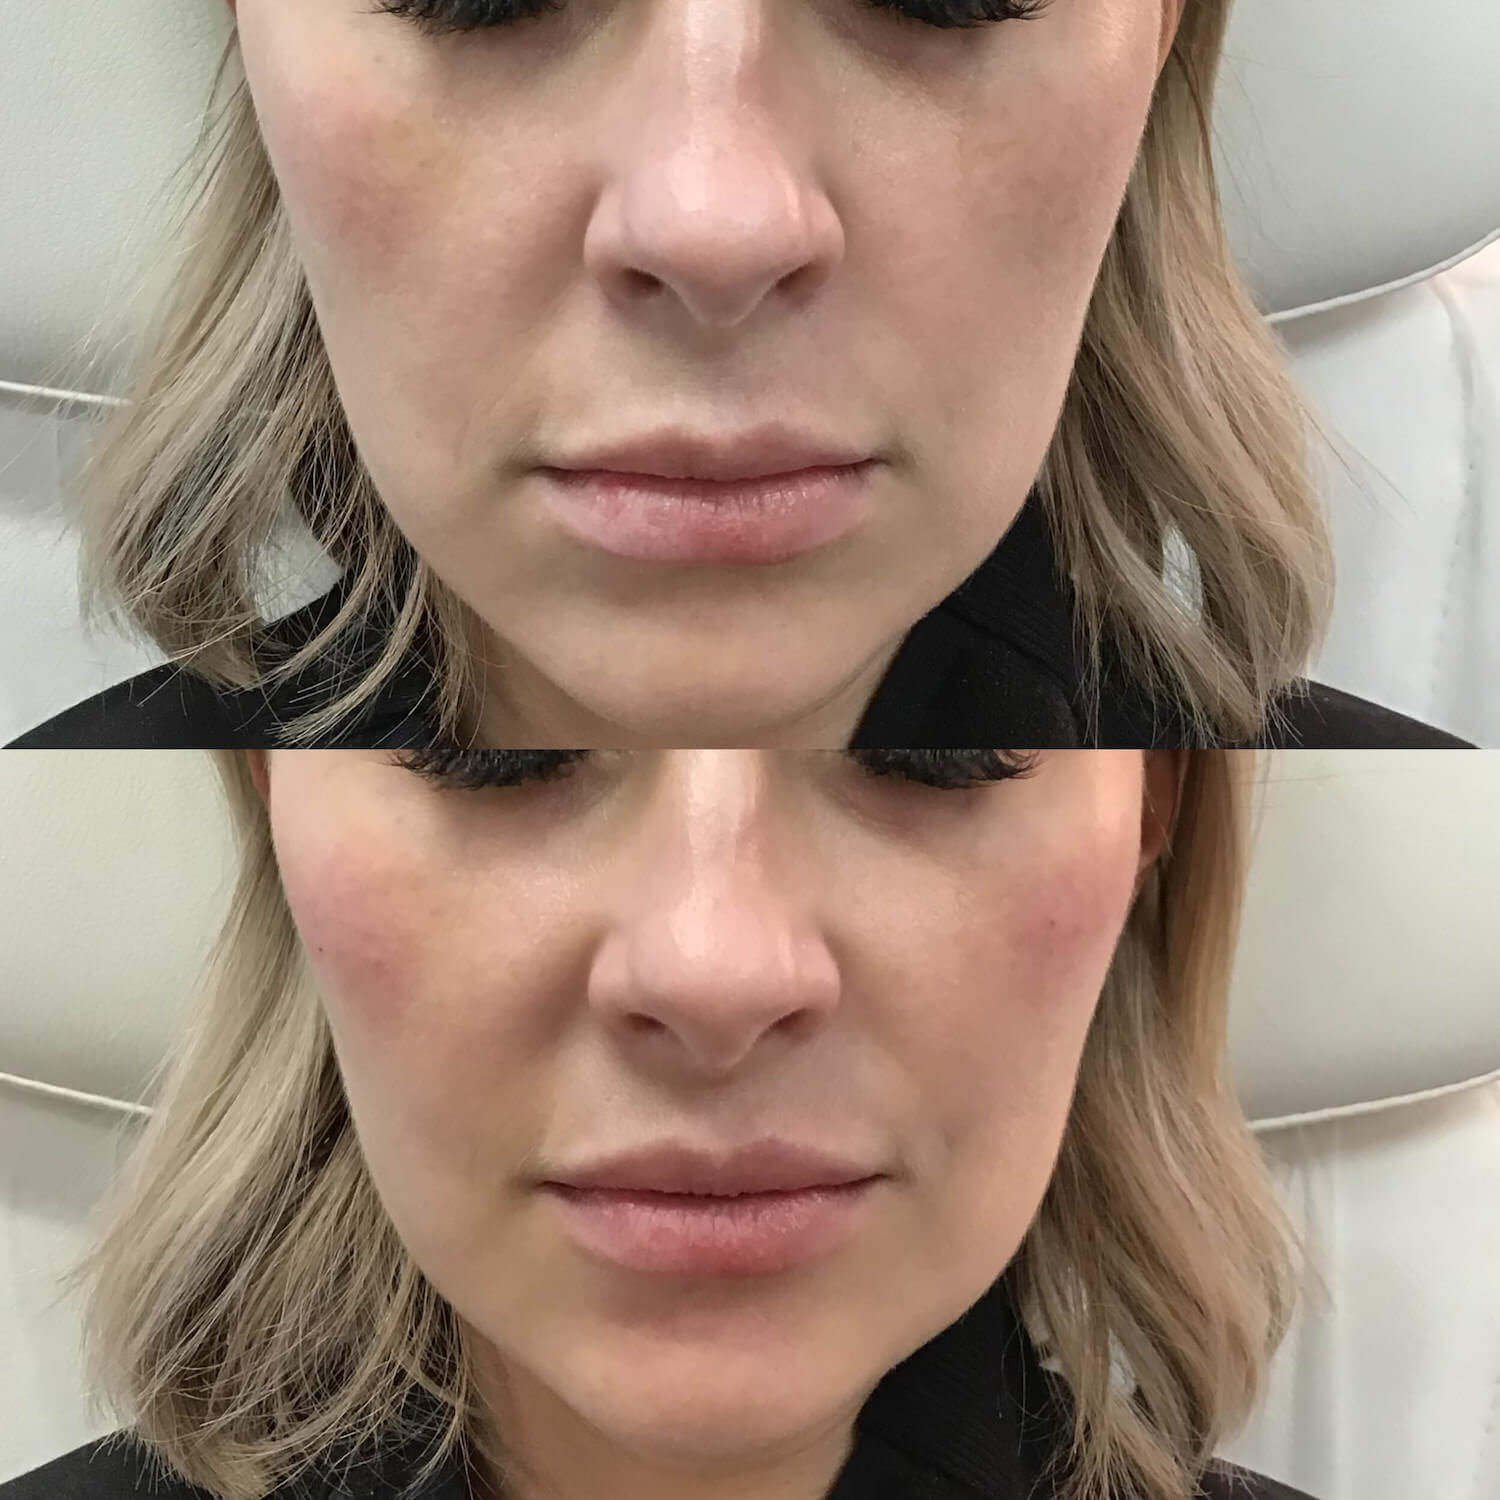 dermal and lip injections bethesda - before and after